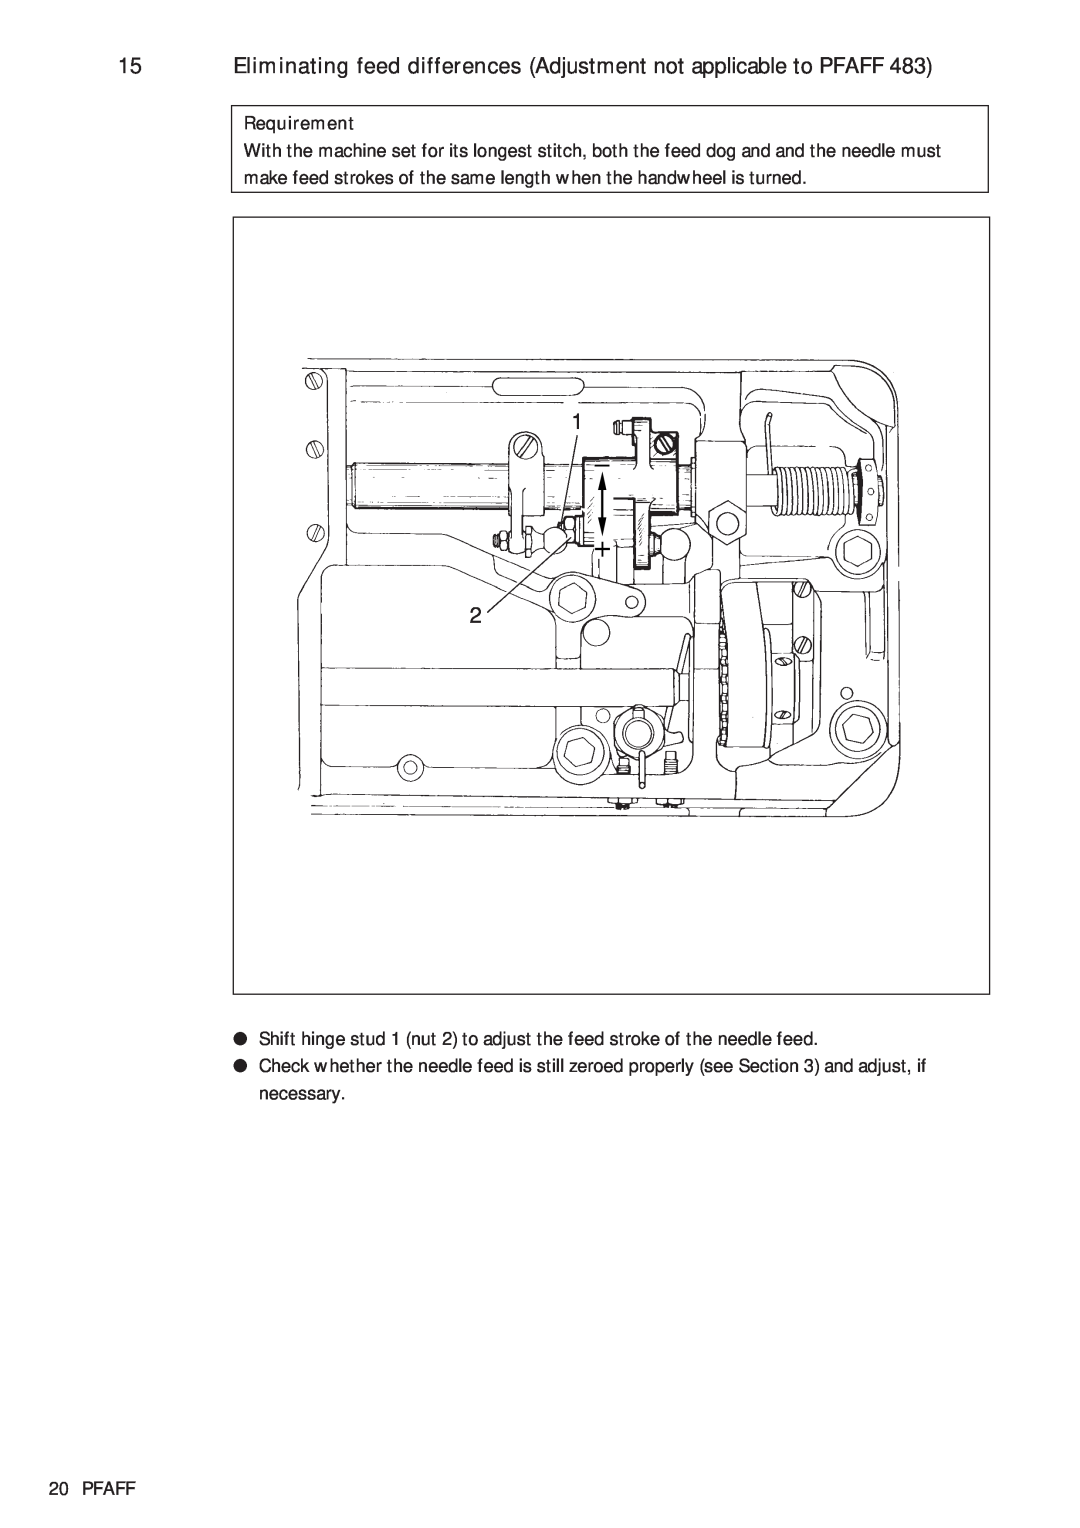 Pfaff 481, 483 service manual Eliminating feed differences Adjustment not applicable to PFAFF, Requirement, Pfaff 